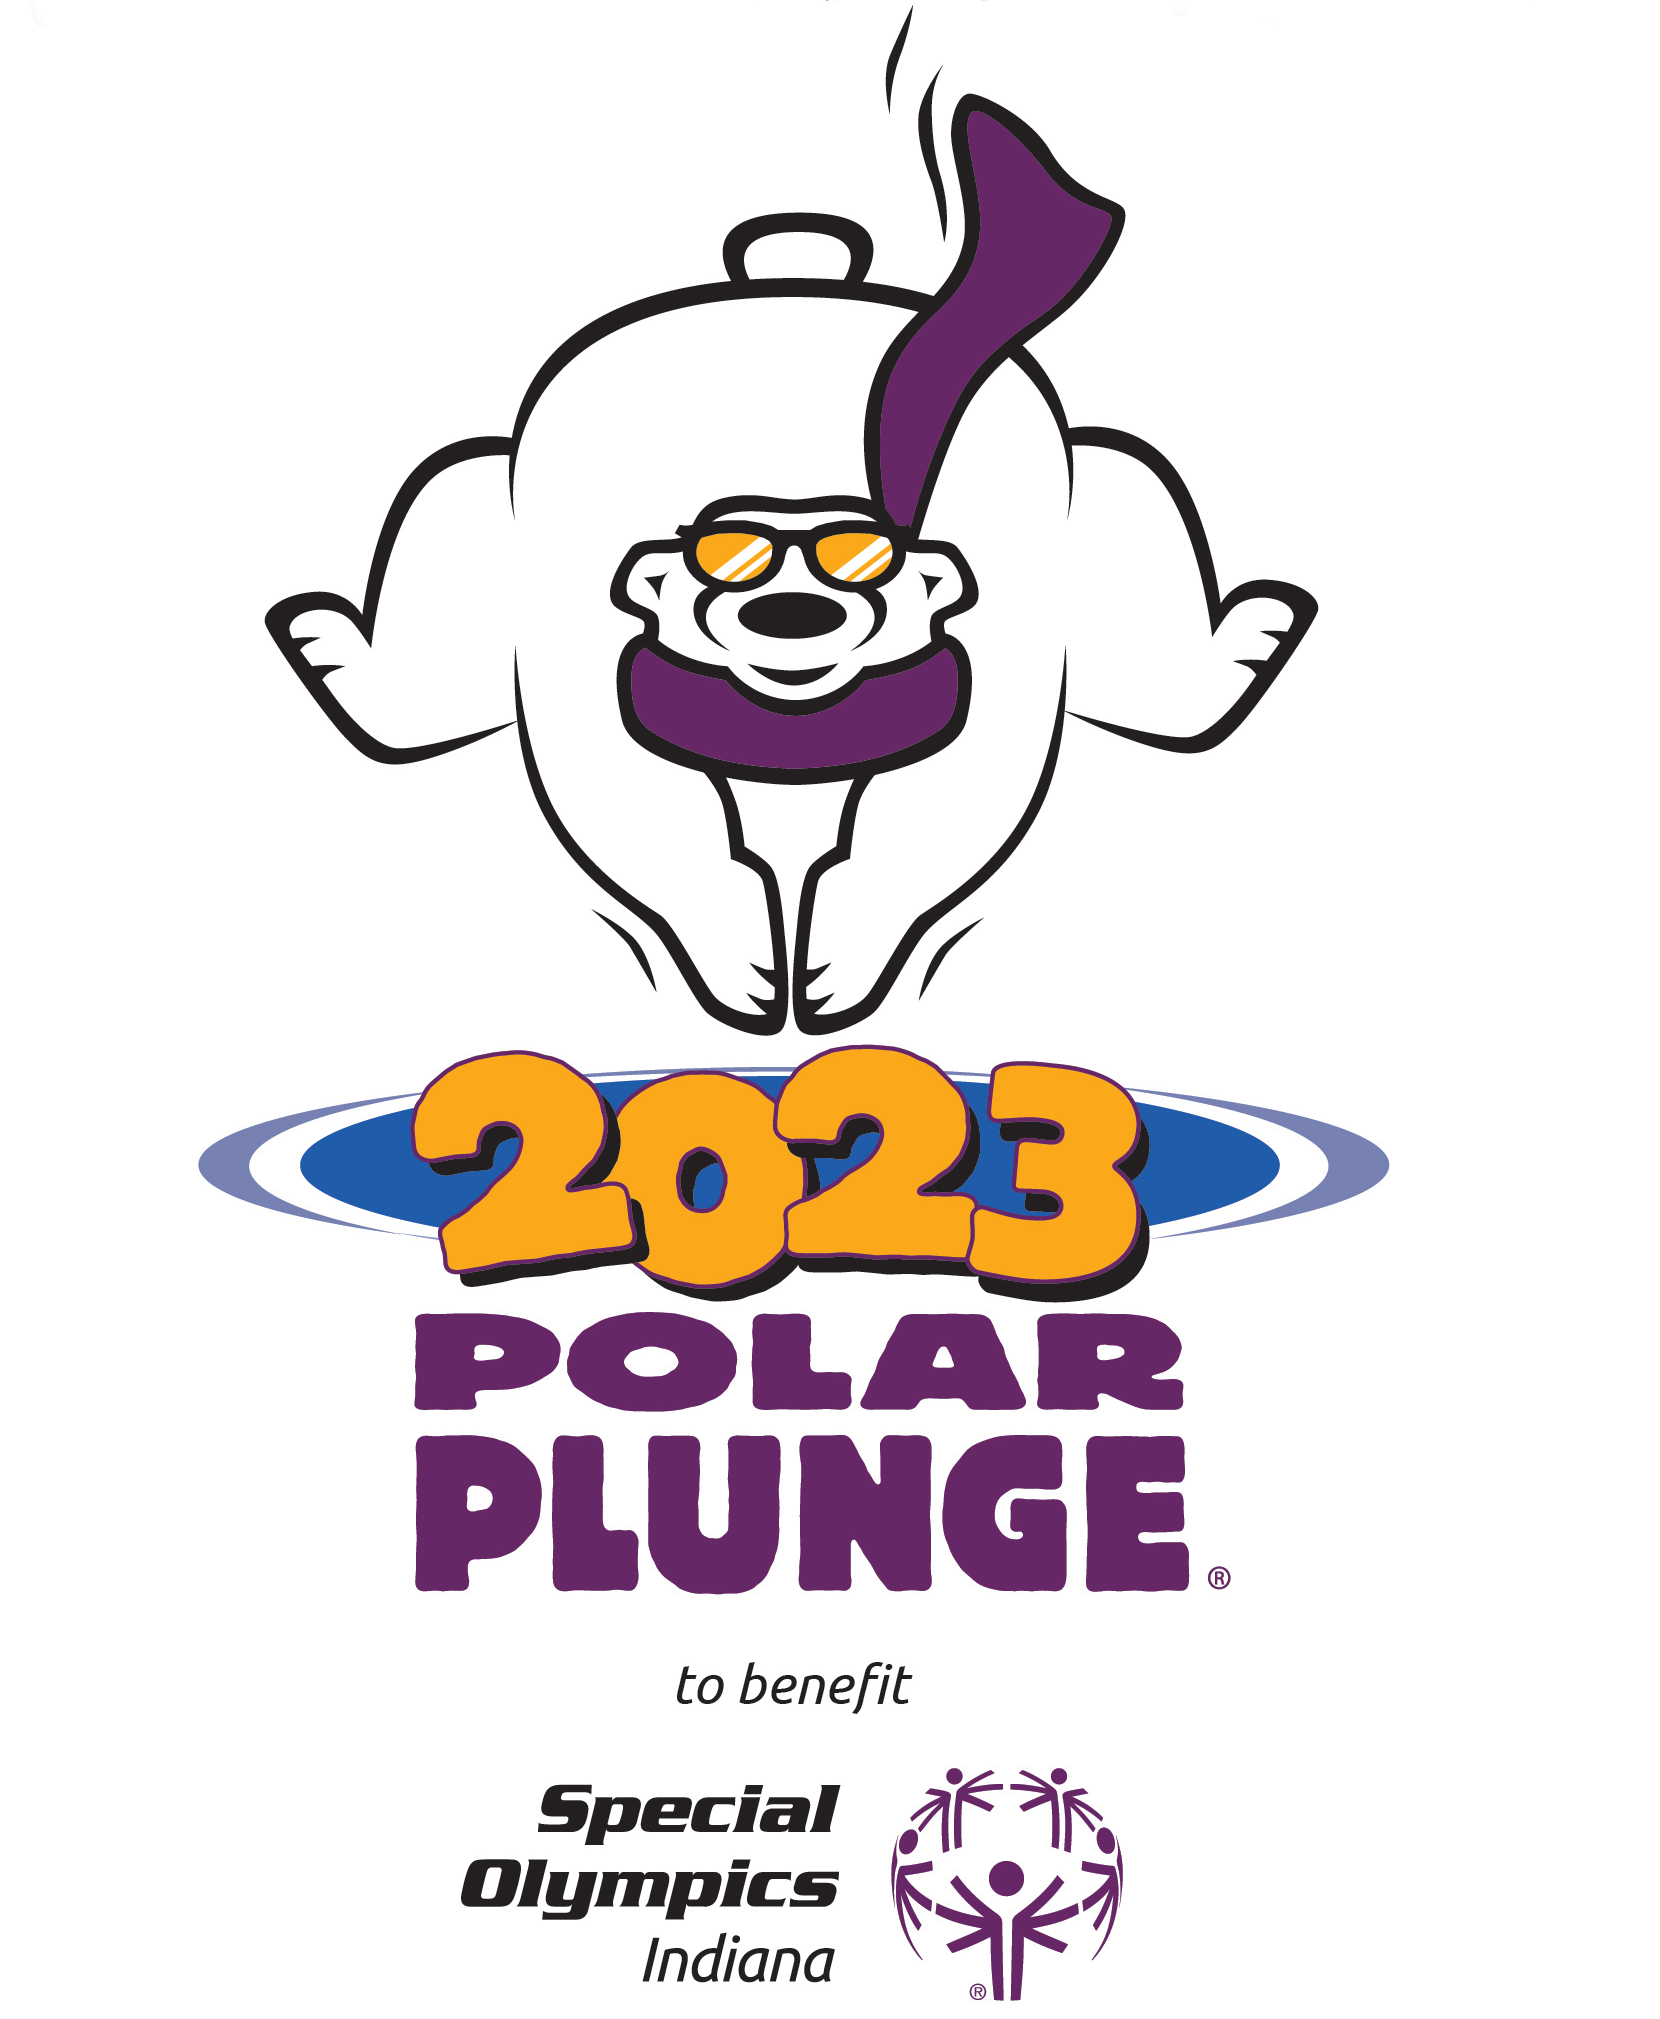 Polar Plunge Run in Anywhere, IN Details, Registration, and Results